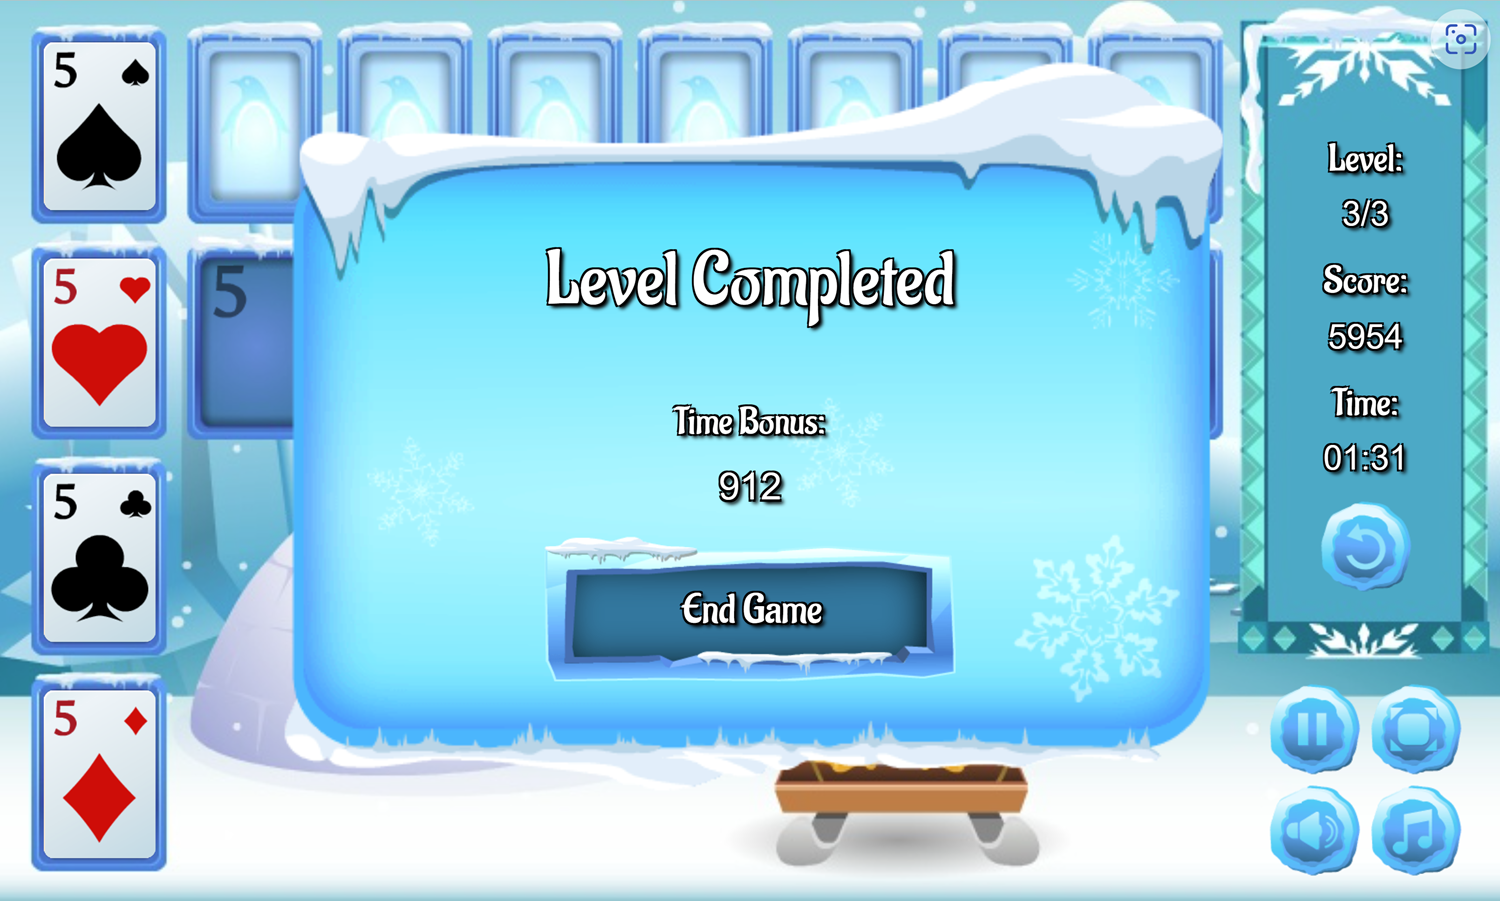 Penguin Solitaire Game Level Completed Screen Screenshot.